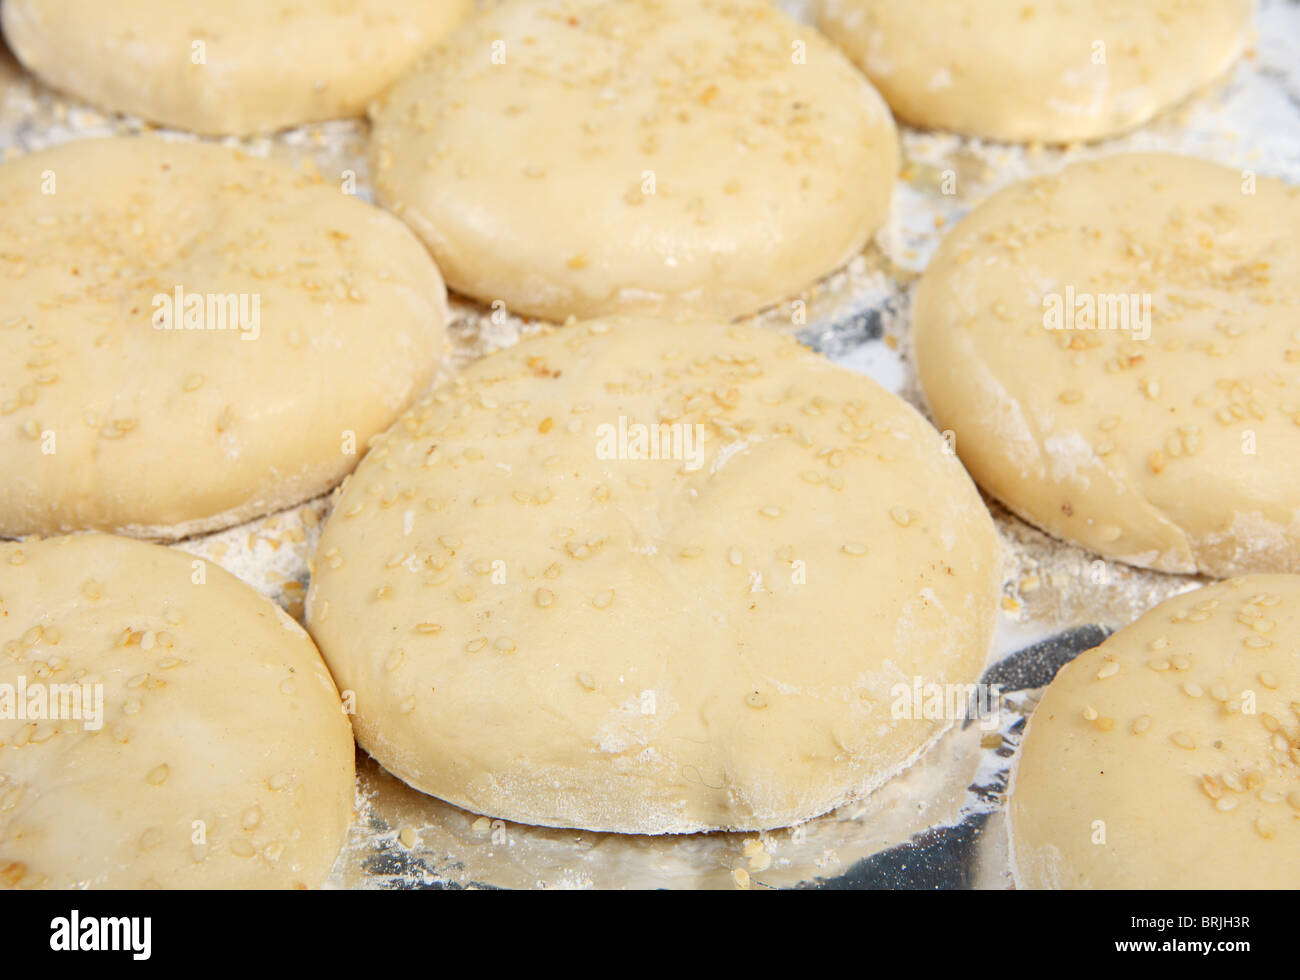 A baking tray full of almost-risen burger bun rolls, topped with sesame seeds Stock Photo